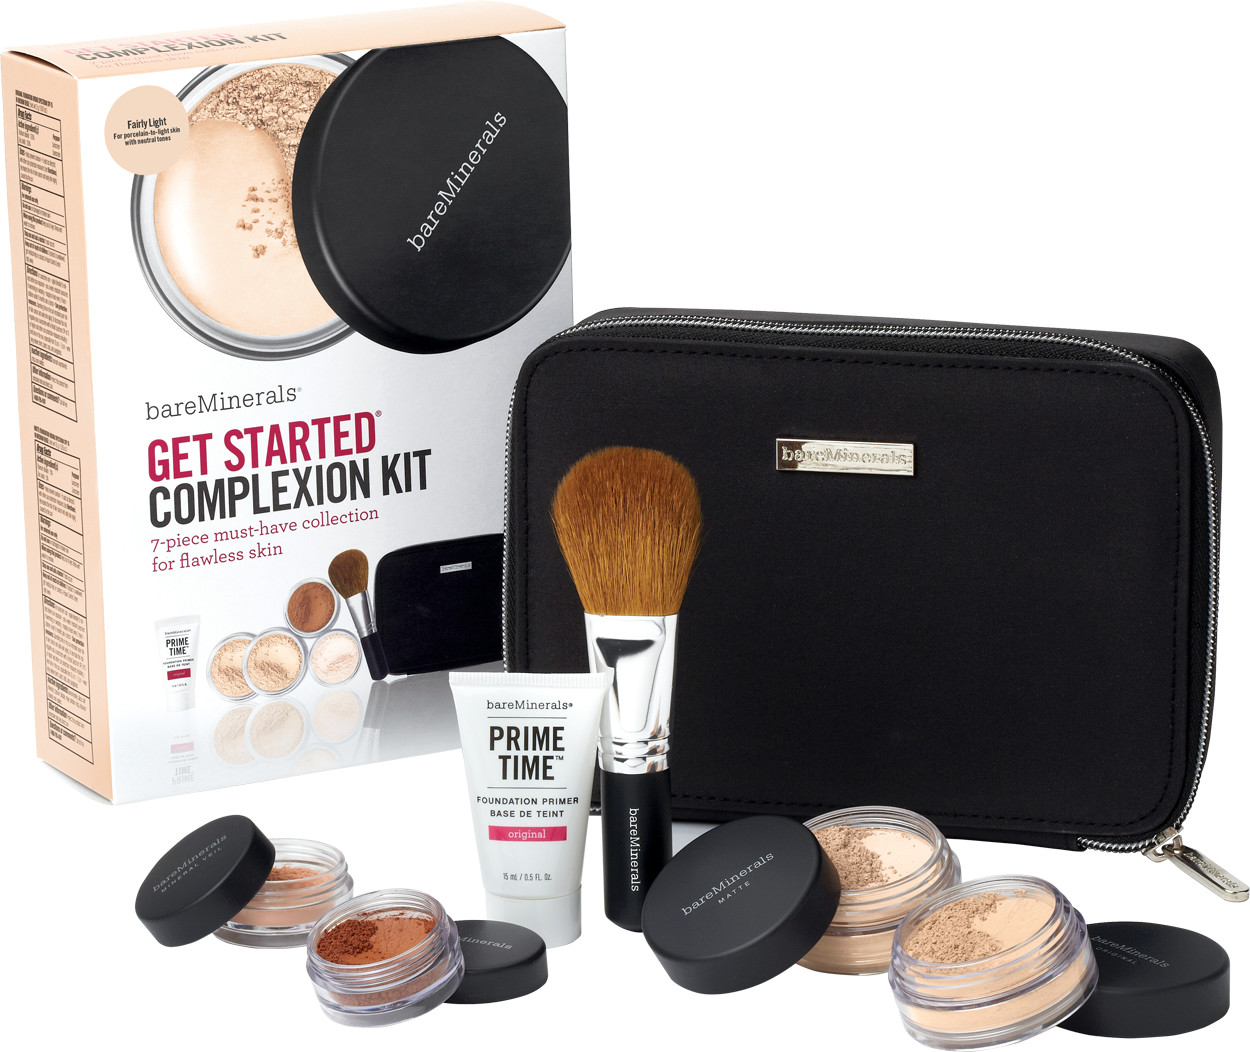 bareminerals_get_started_complexion_kit_fairly_light_1